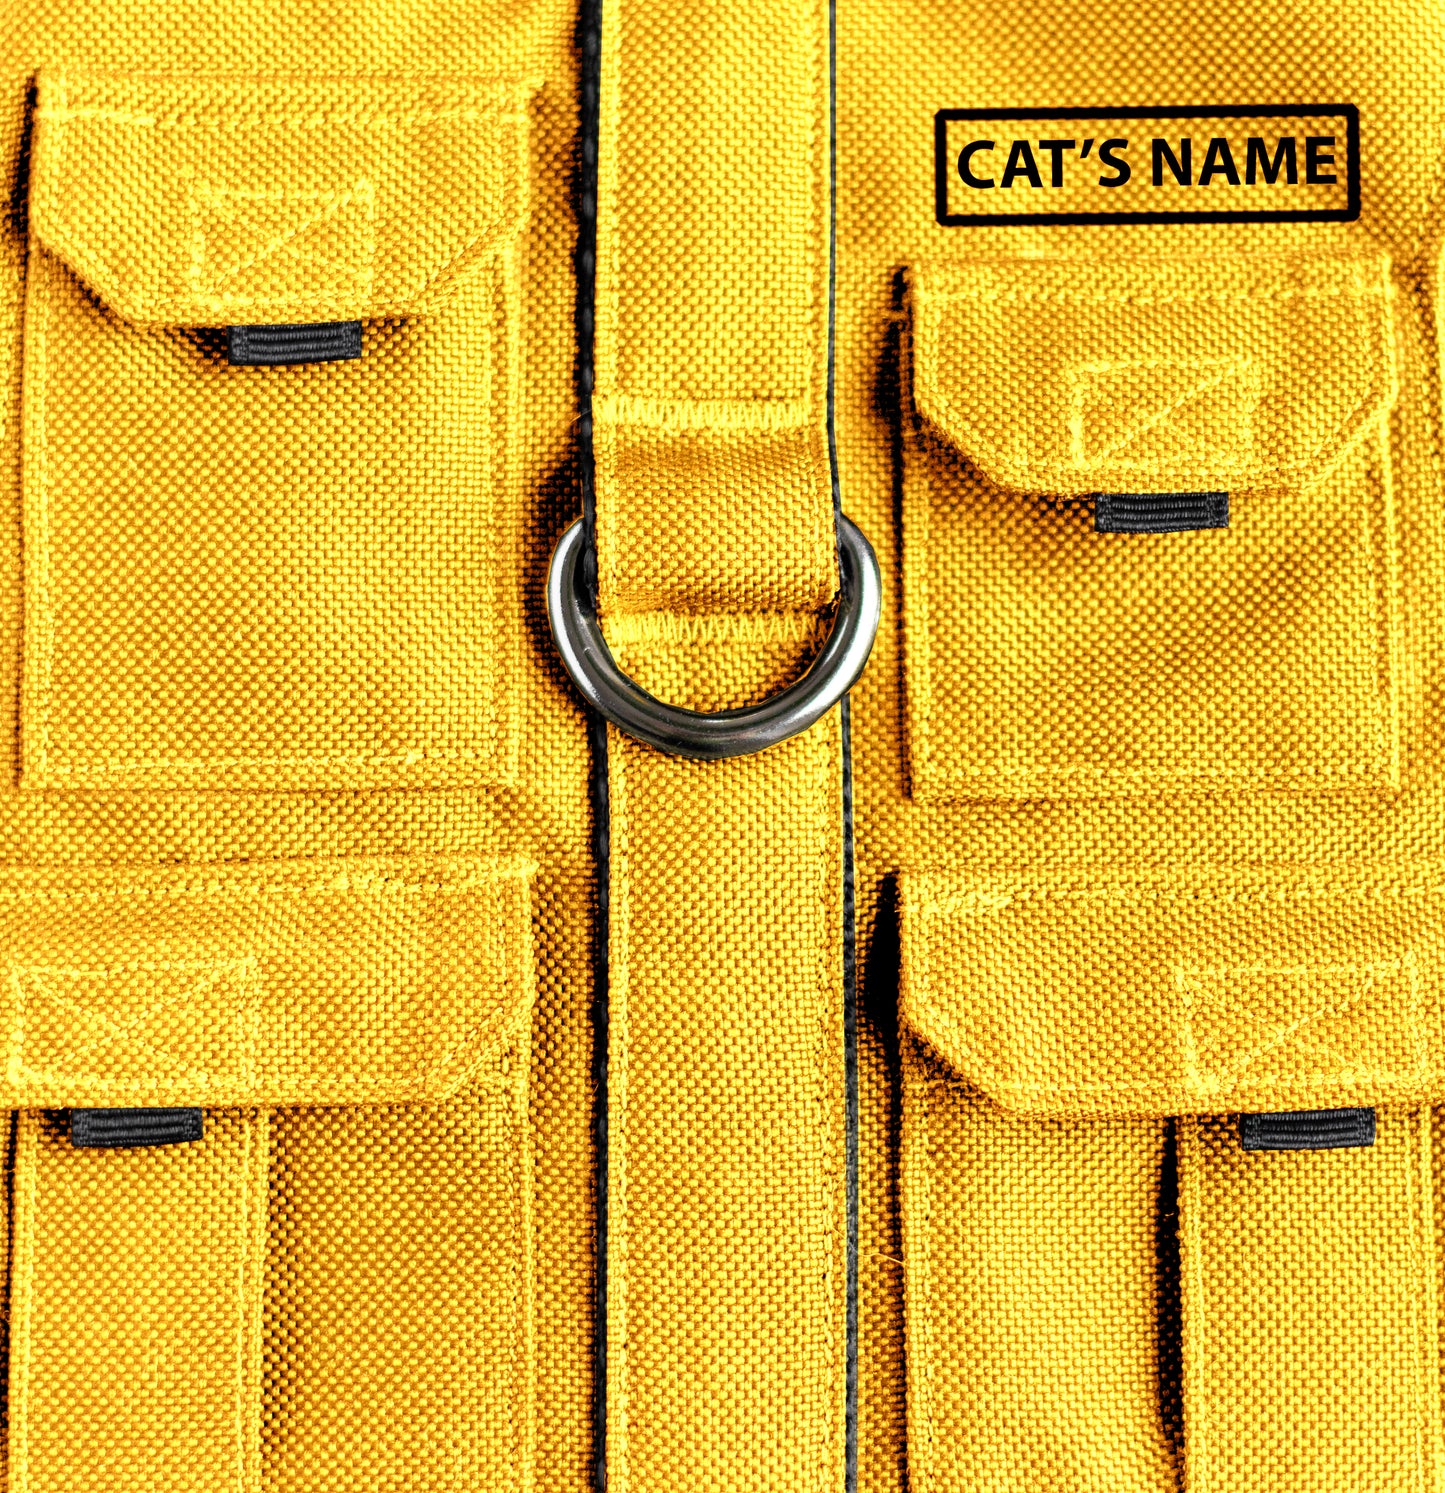 Yellow Fishing vest. Custom-made Water-repellent Cat Harness with Pockets for GPS-tracker